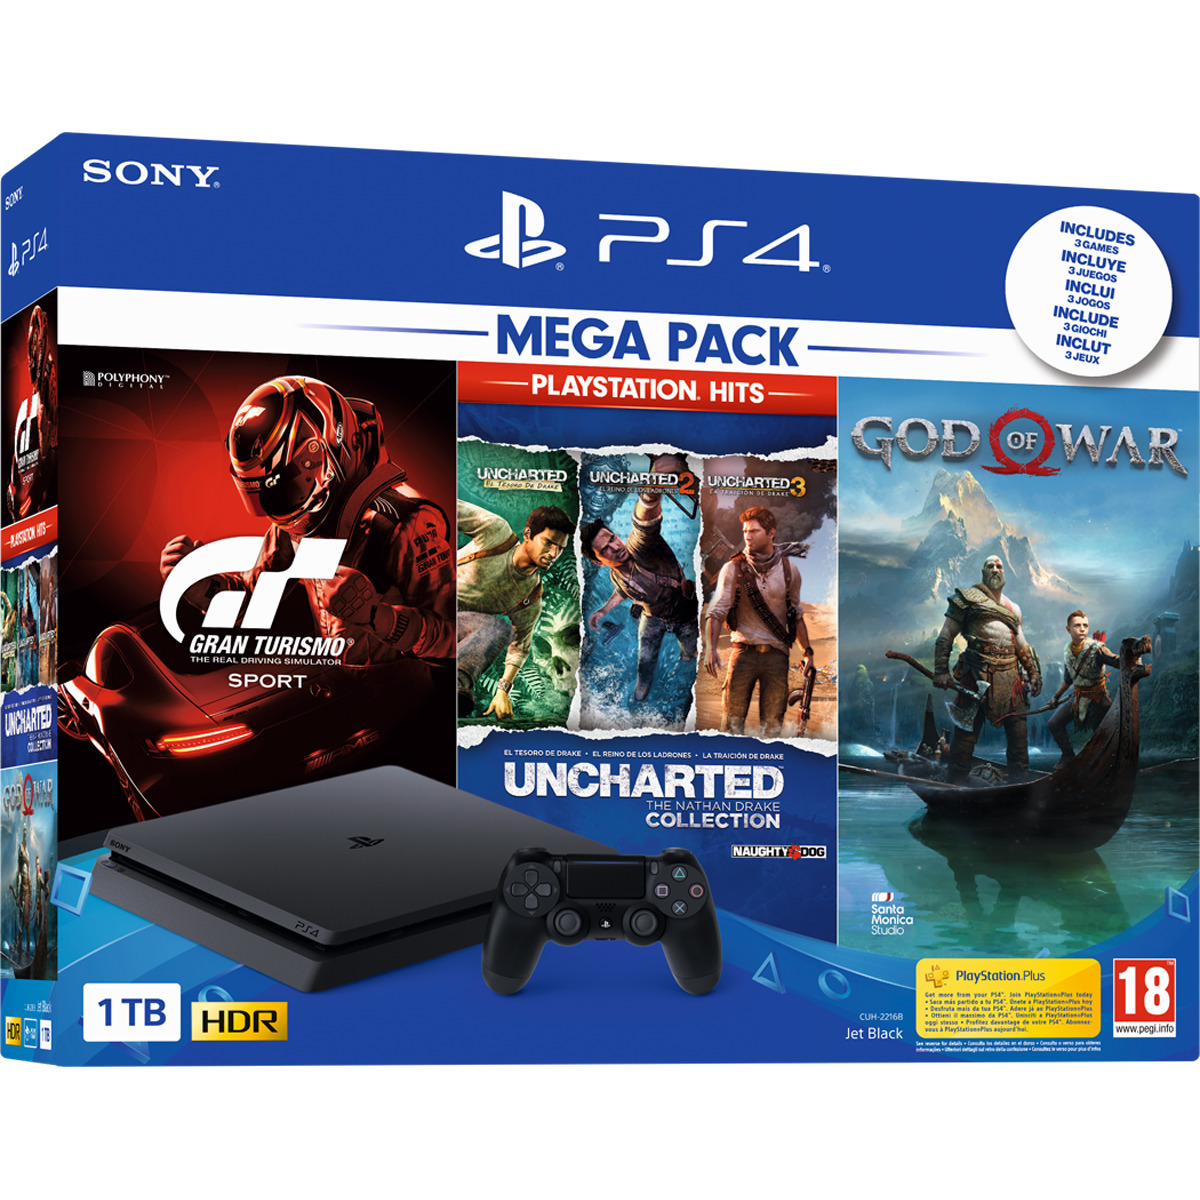 PS4 1TB + Gran Turismo Sport + God of War + Uncharted Collection solo 279,9€